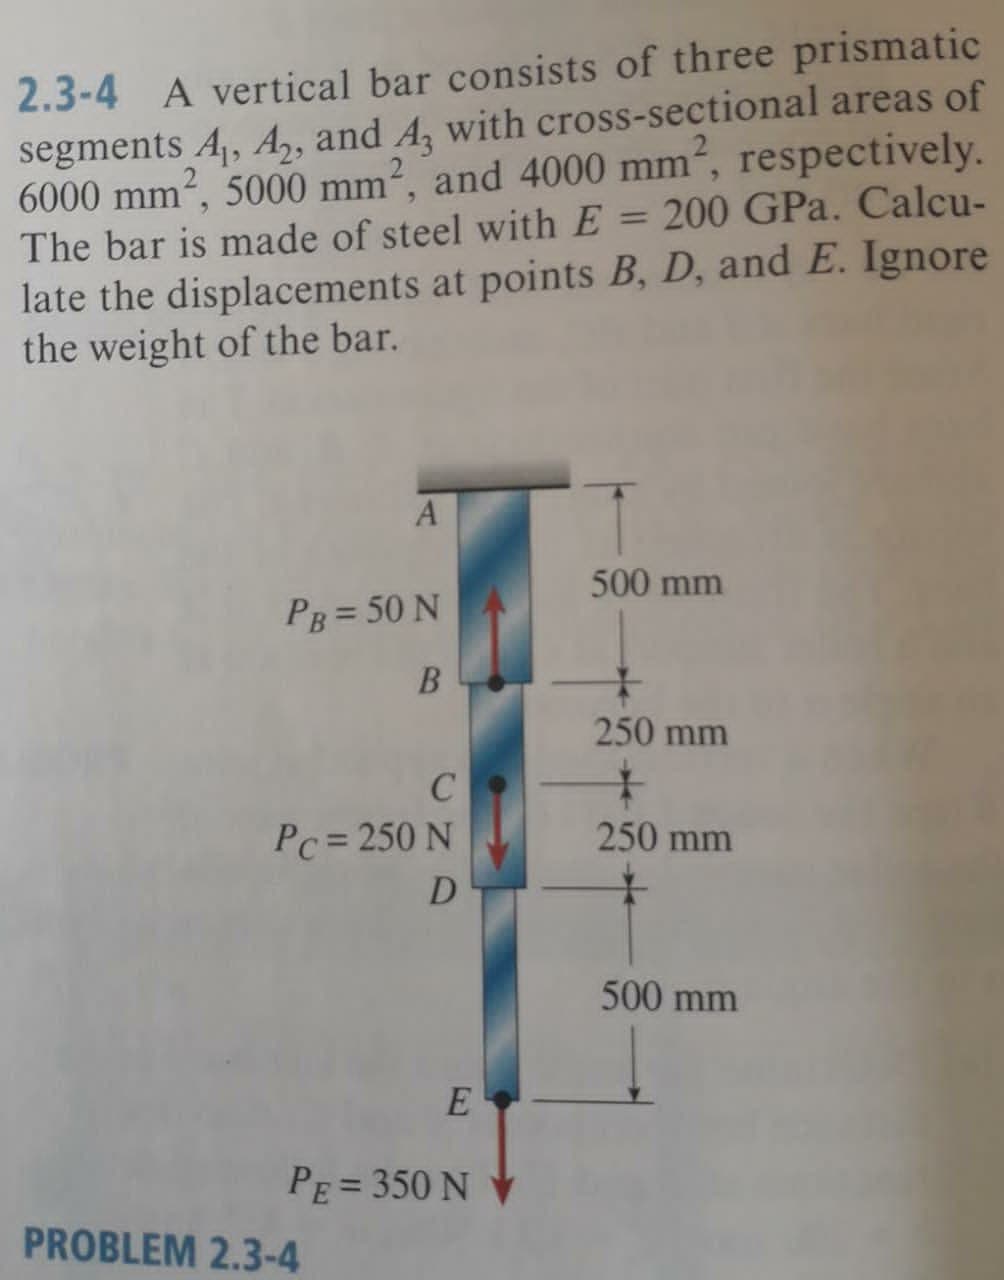 2.3-4 A vertical bar consists of three prismatic
segments A, A,, and A, with cross-sectional areas of
6000 mm2, 5000 mm², and 4000 mm, respectively.
The bar is made of steel with E = 200 GPa. Calcu-
late the displacements at points B, D, and E. Ignore
the weight of the bar.
%3D
500 mm
PB = 50 N
B
250 mm
Pc = 250 N
250 mm
500 mm
PE= 350 N V
PROBLEM 2.3-4
动十月十
CND
